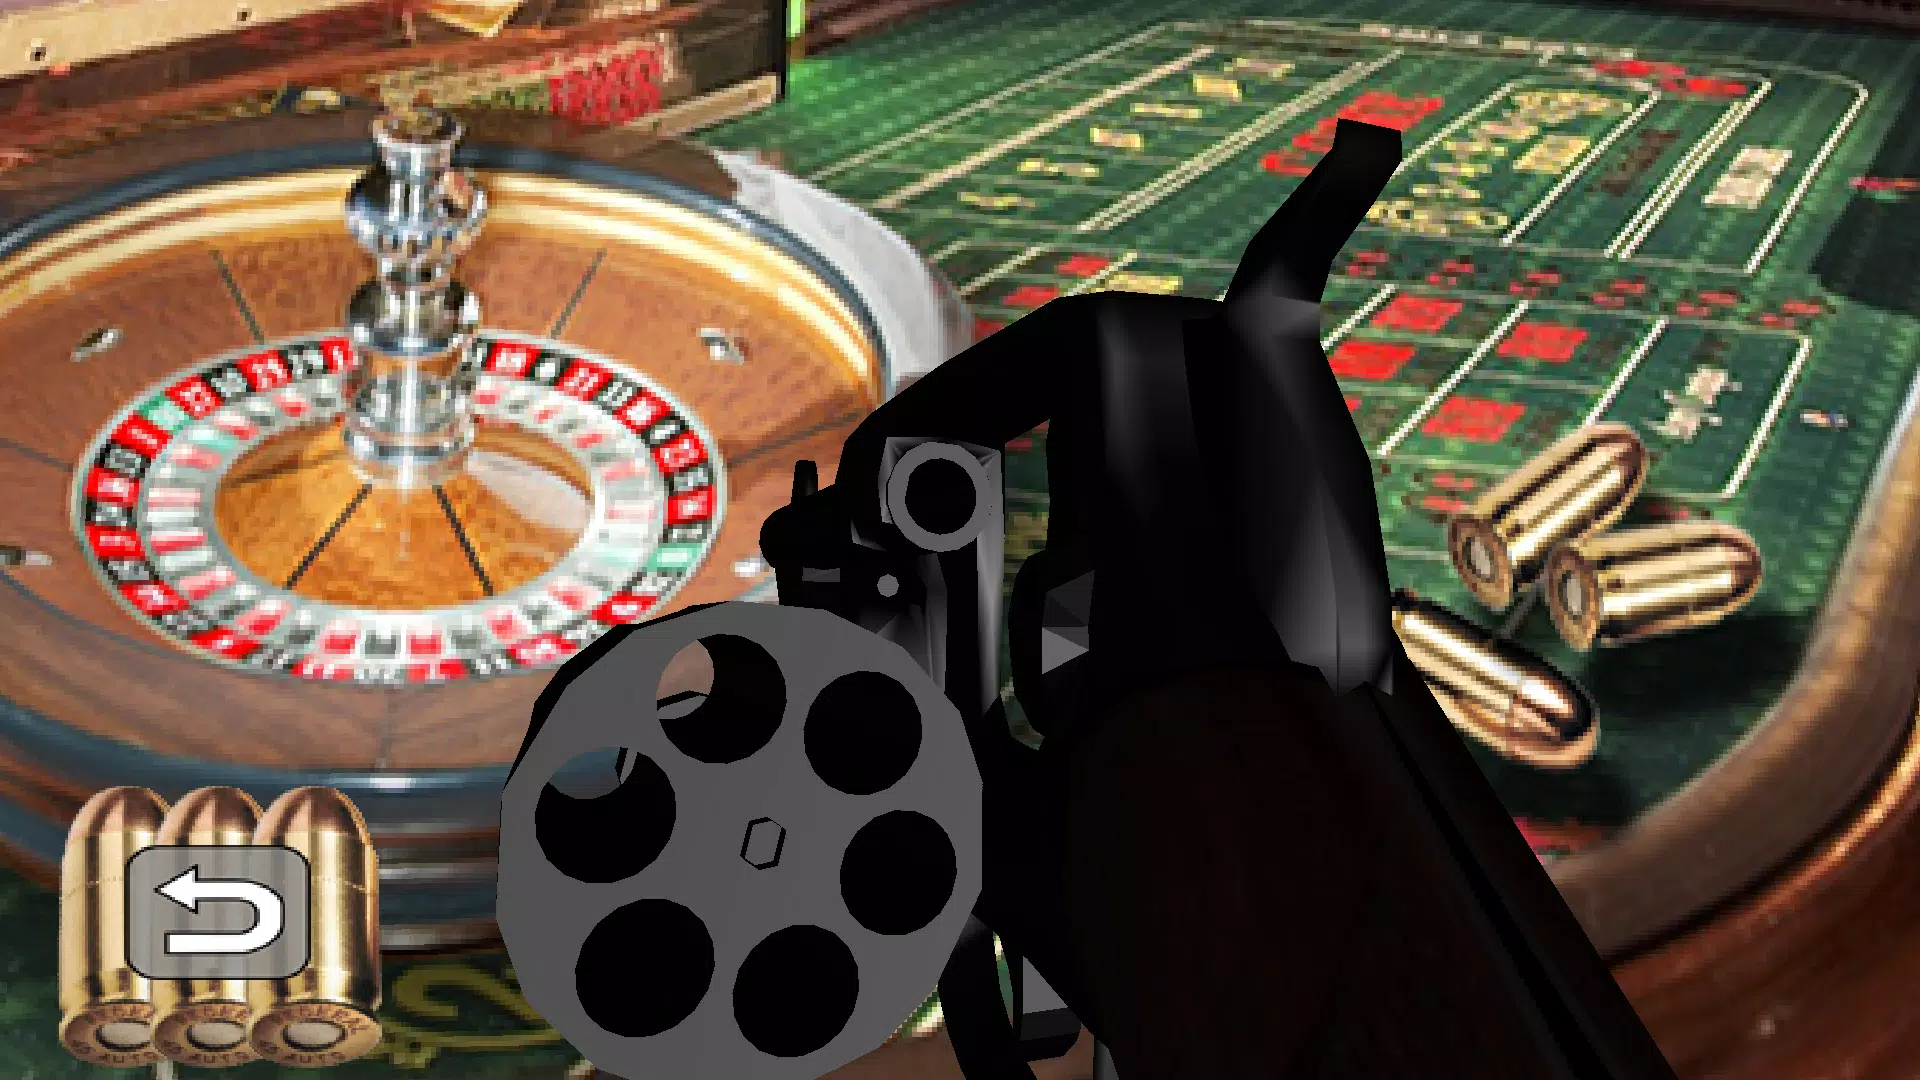 Published on Android my Multiplayer Online Game of Russian Roulette.